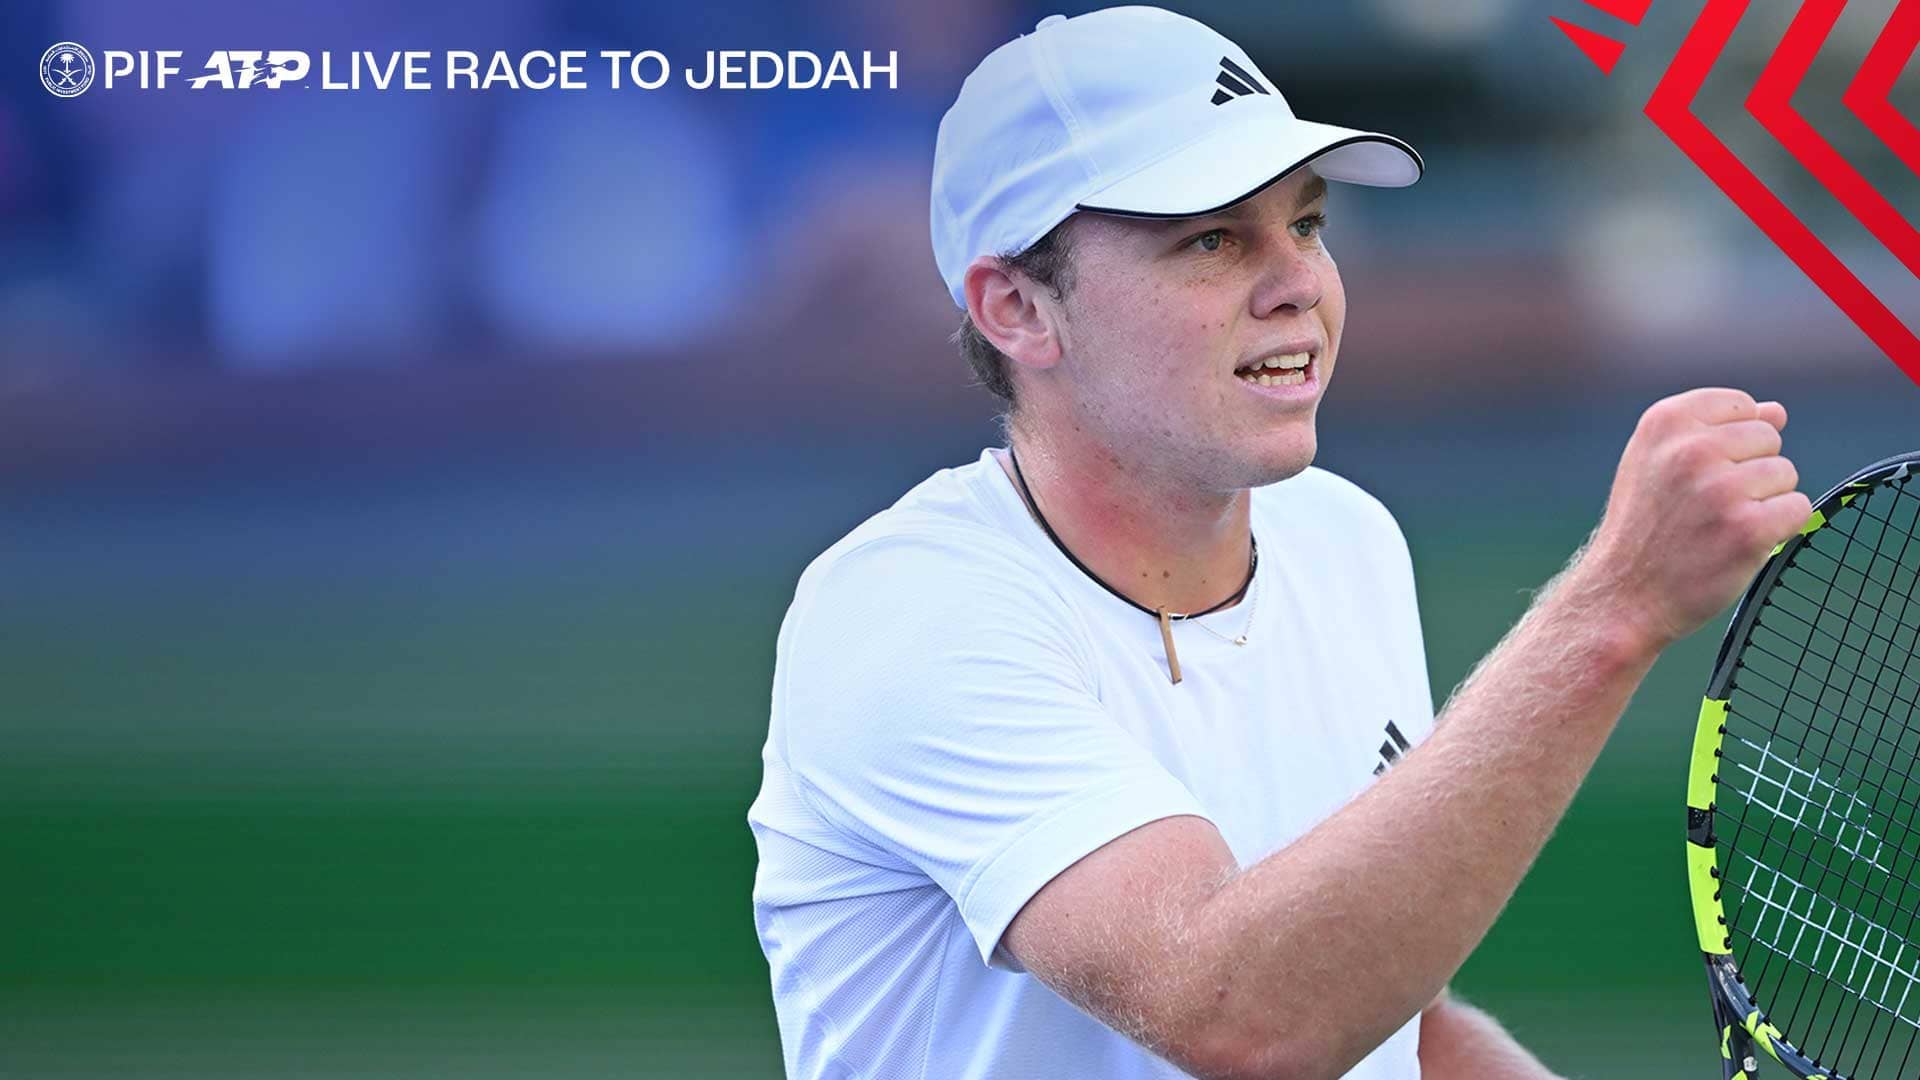 Alex Michelsen is fourth in the PIF ATP Live Race To Jeddah.